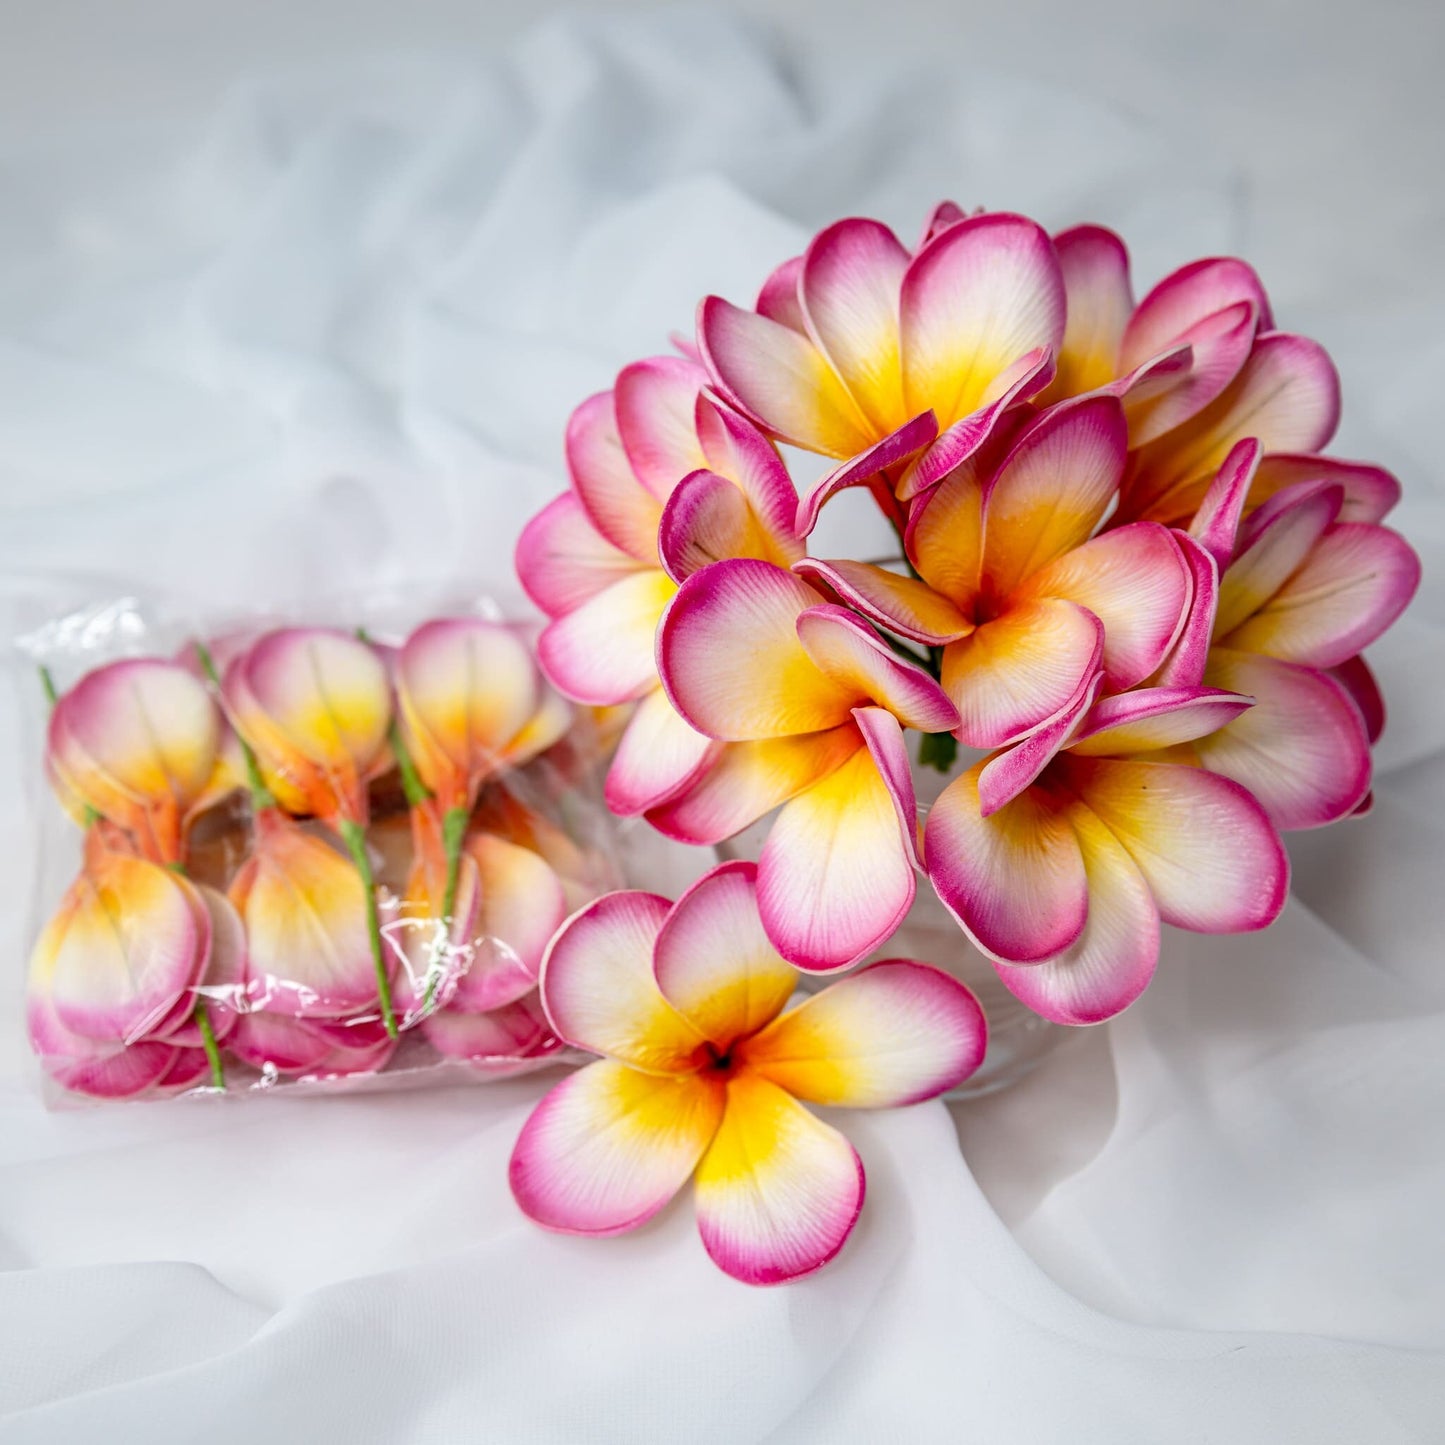 artificial Sunset Pink Frangipani Flowerheads in clear vase